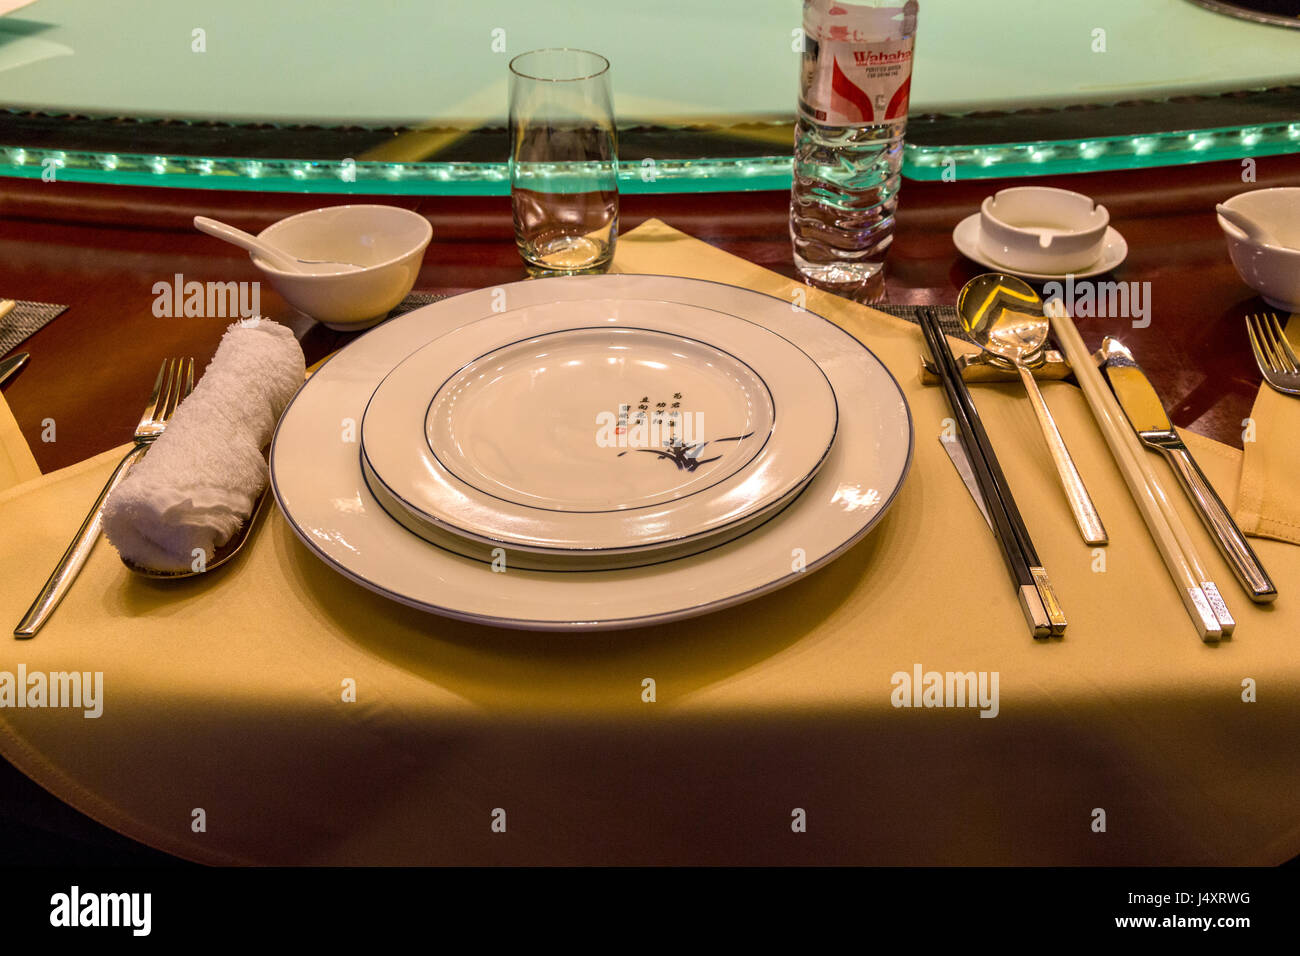 China.  Chinese Table Place Setting with Chopsticks.  Lazy Susan (Rotating Serving Table) in background. Stock Photo